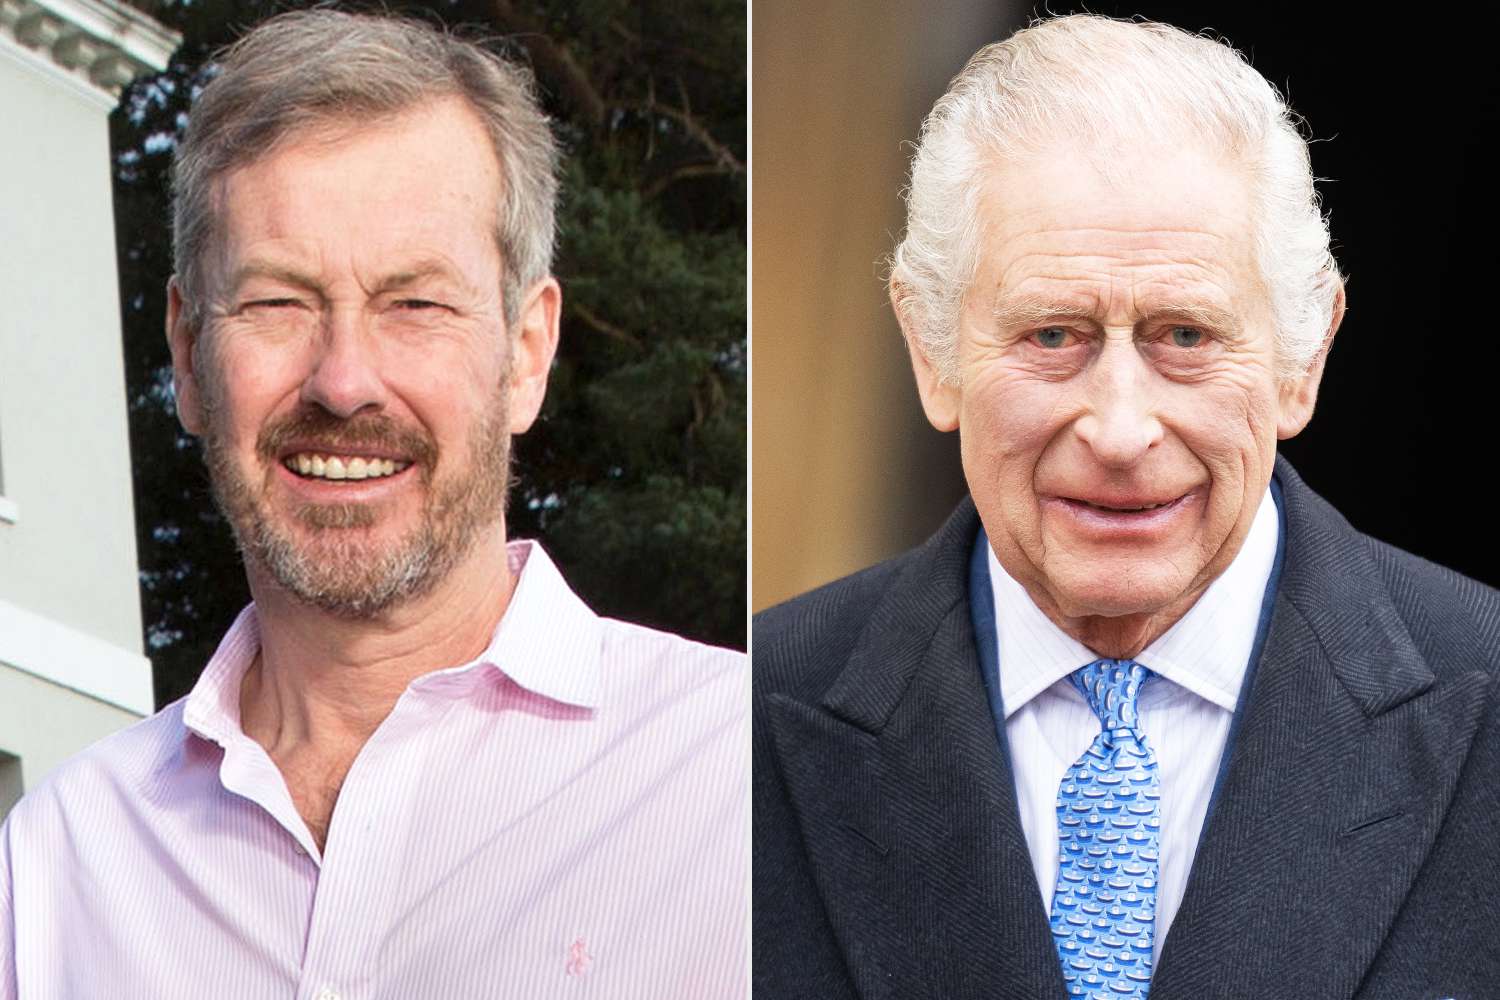 King Charles' Cousin Lord Ivar Mountbatten Joins “The Traitors”: Meet the Gay Royal Family Member Turned Reality Star